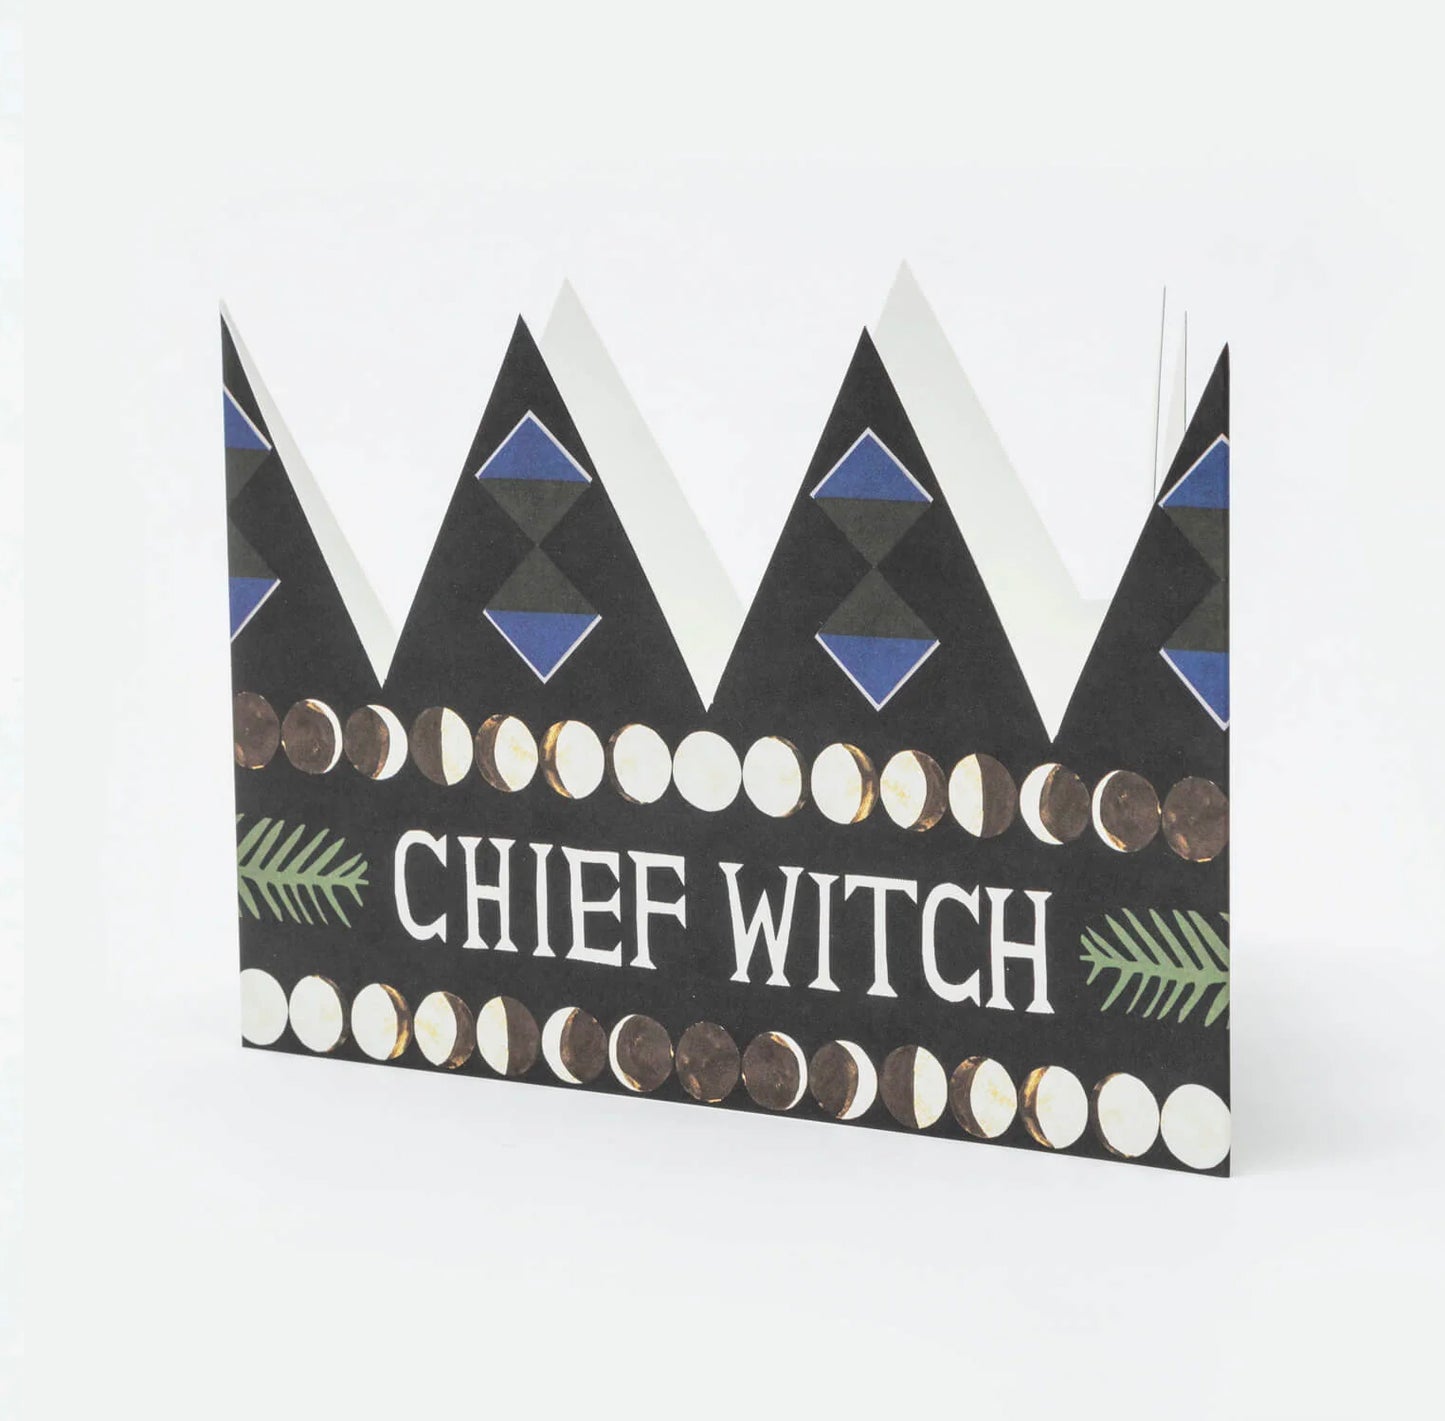 Chief Witch Party Hat